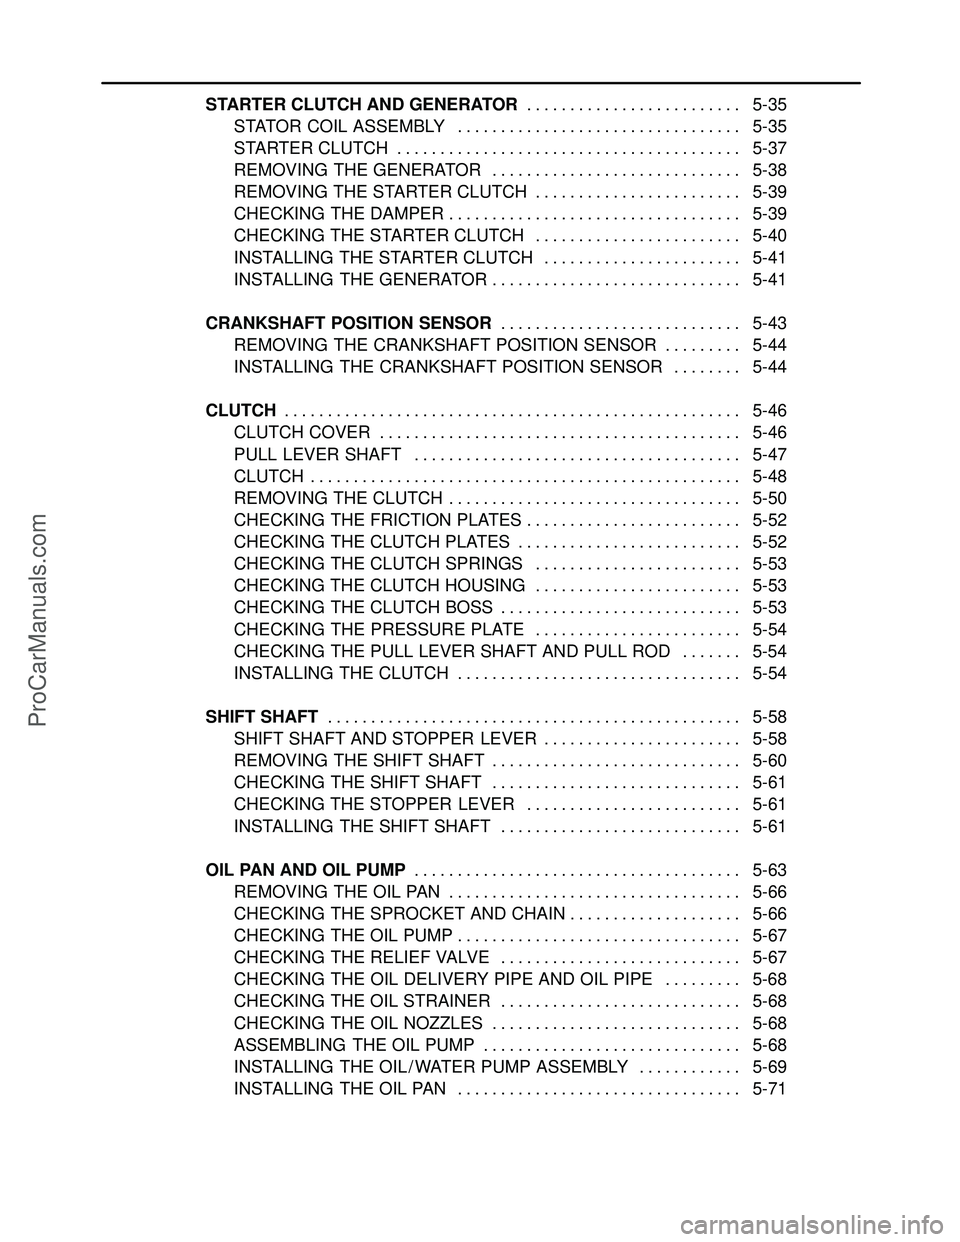 YAMAHA YZF-R1SC 2004  Service Manual STARTER CLUTCH AND GENERATOR5-35 . . . . . . . . . . . . . . . . . . . . . . . . . 
STATOR COIL ASSEMBLY 5-35. . . . . . . . . . . . . . . . . . . . . . . . . . . . . . . . . 
STARTER CLUTCH 5-37. . .